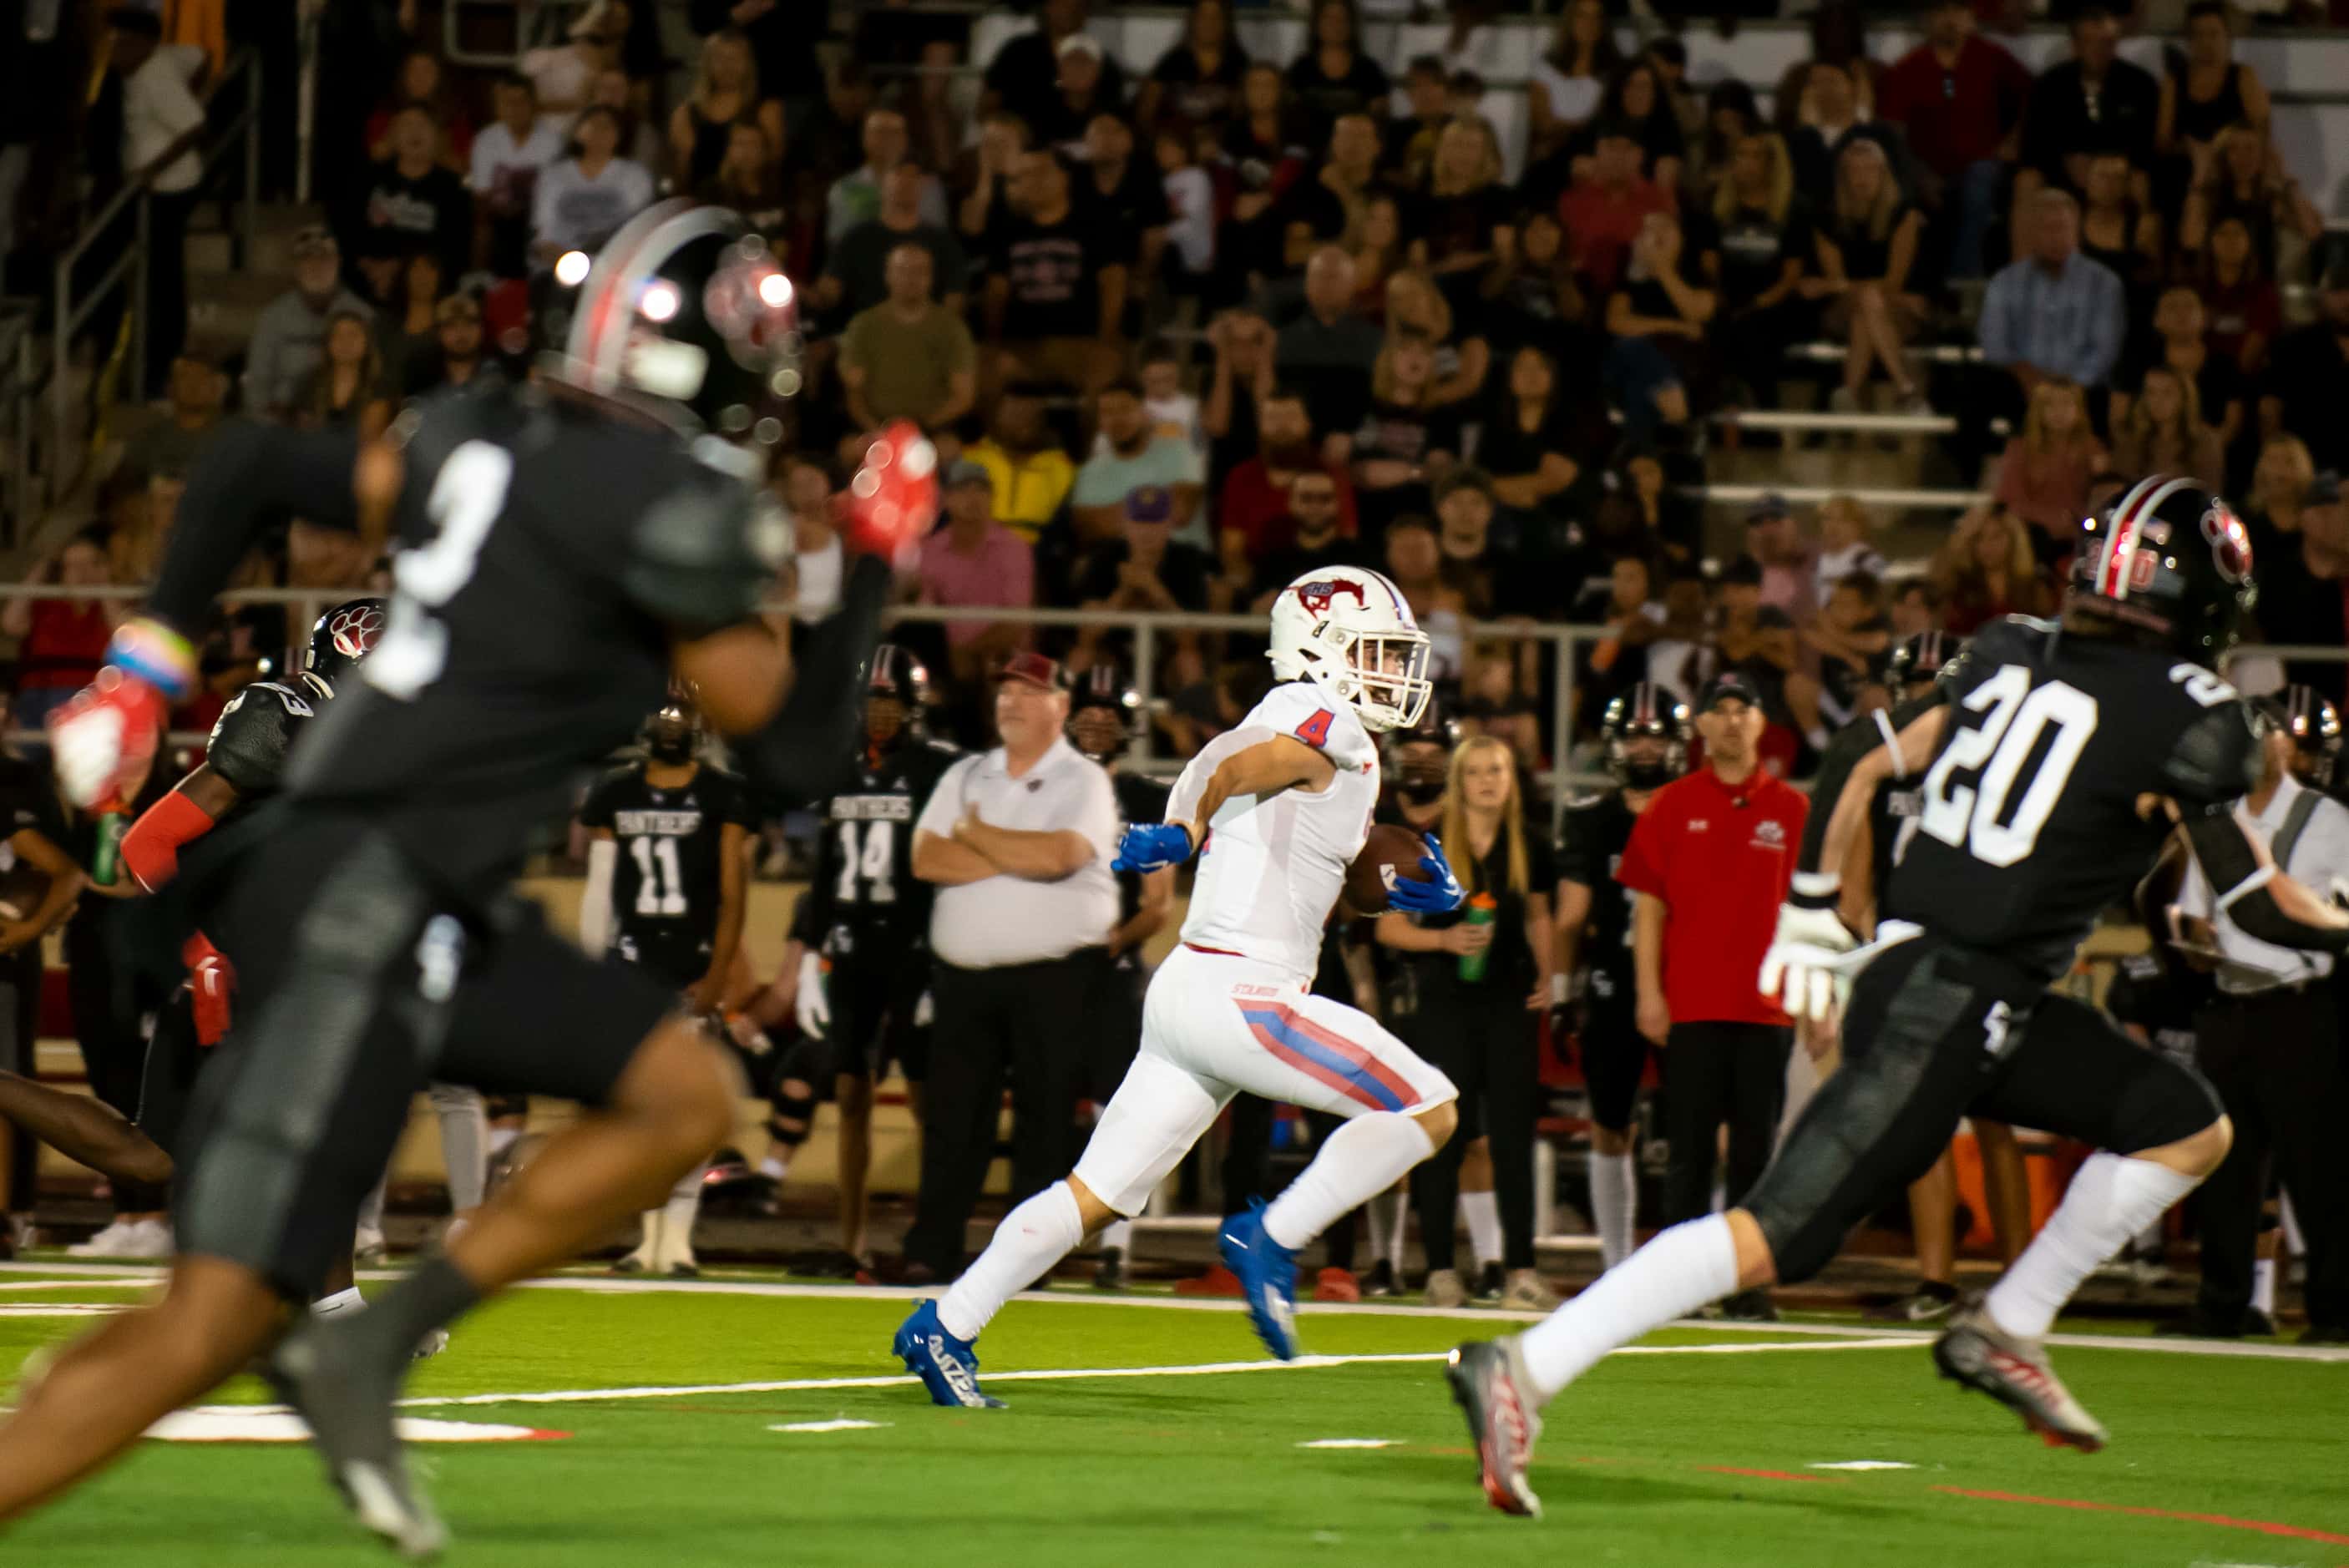 Grapevine senior Parker Polk (4) rushes down the field to score a touchdown during a...